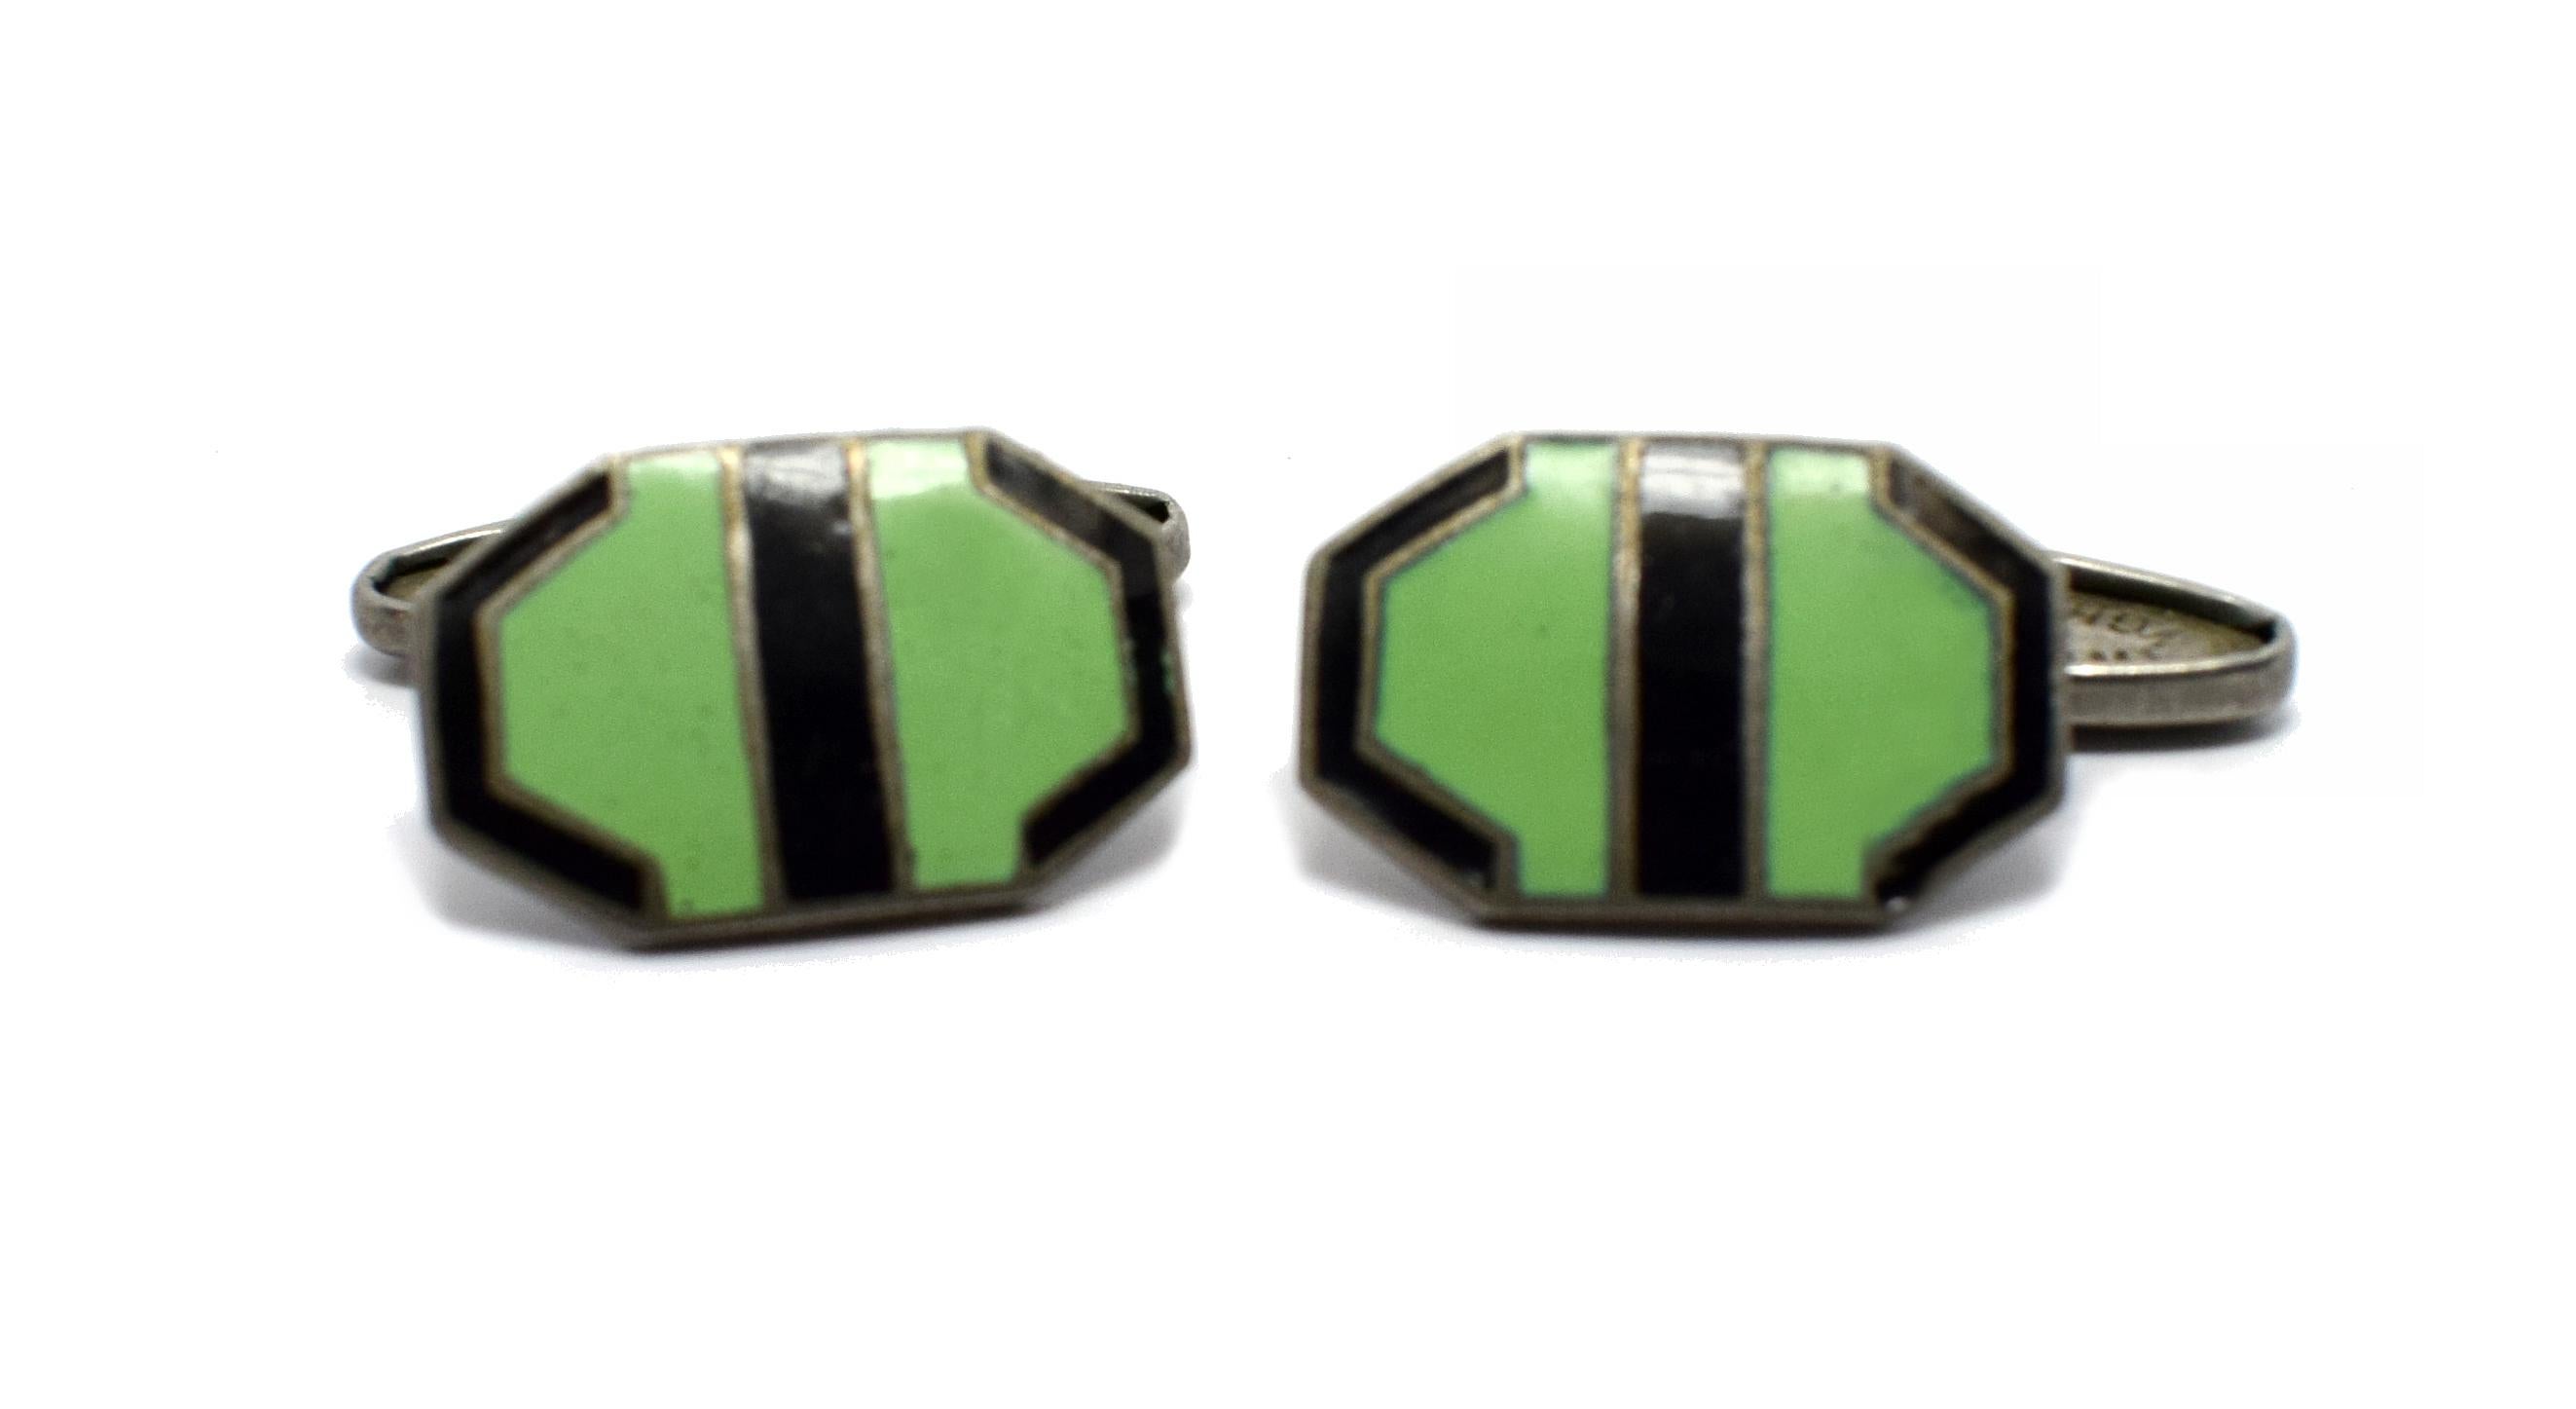 For your consideration are these very typical Art Deco styled cufflinks. Art Deco pastel green with black enamel edging. Lovely shaped and good vintage condition, perfect styling for the modern gentlemen who appreciates the finer things in life. 